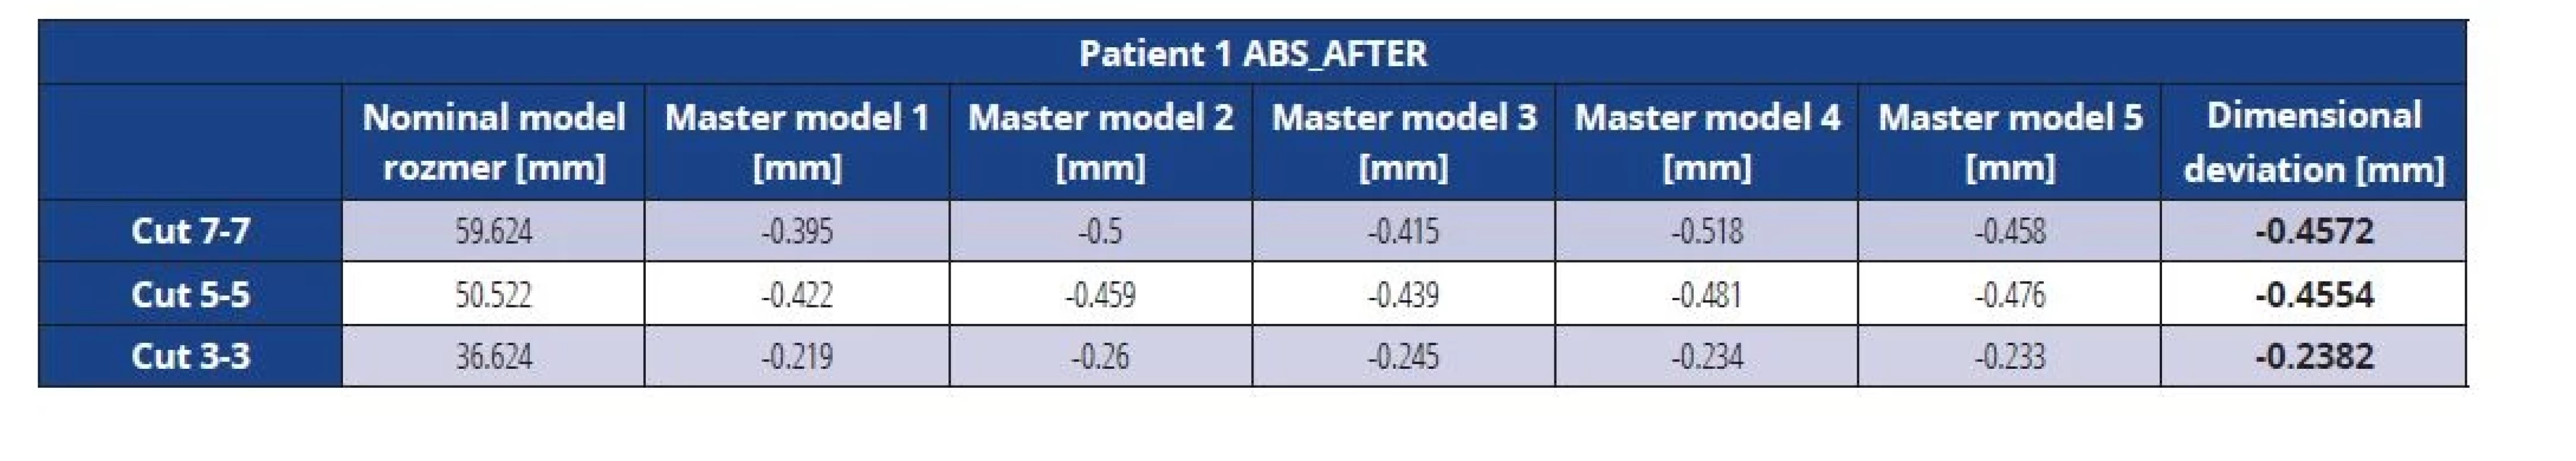 Dimensional deviations of the ABS master model after vacuuming (patient 1)